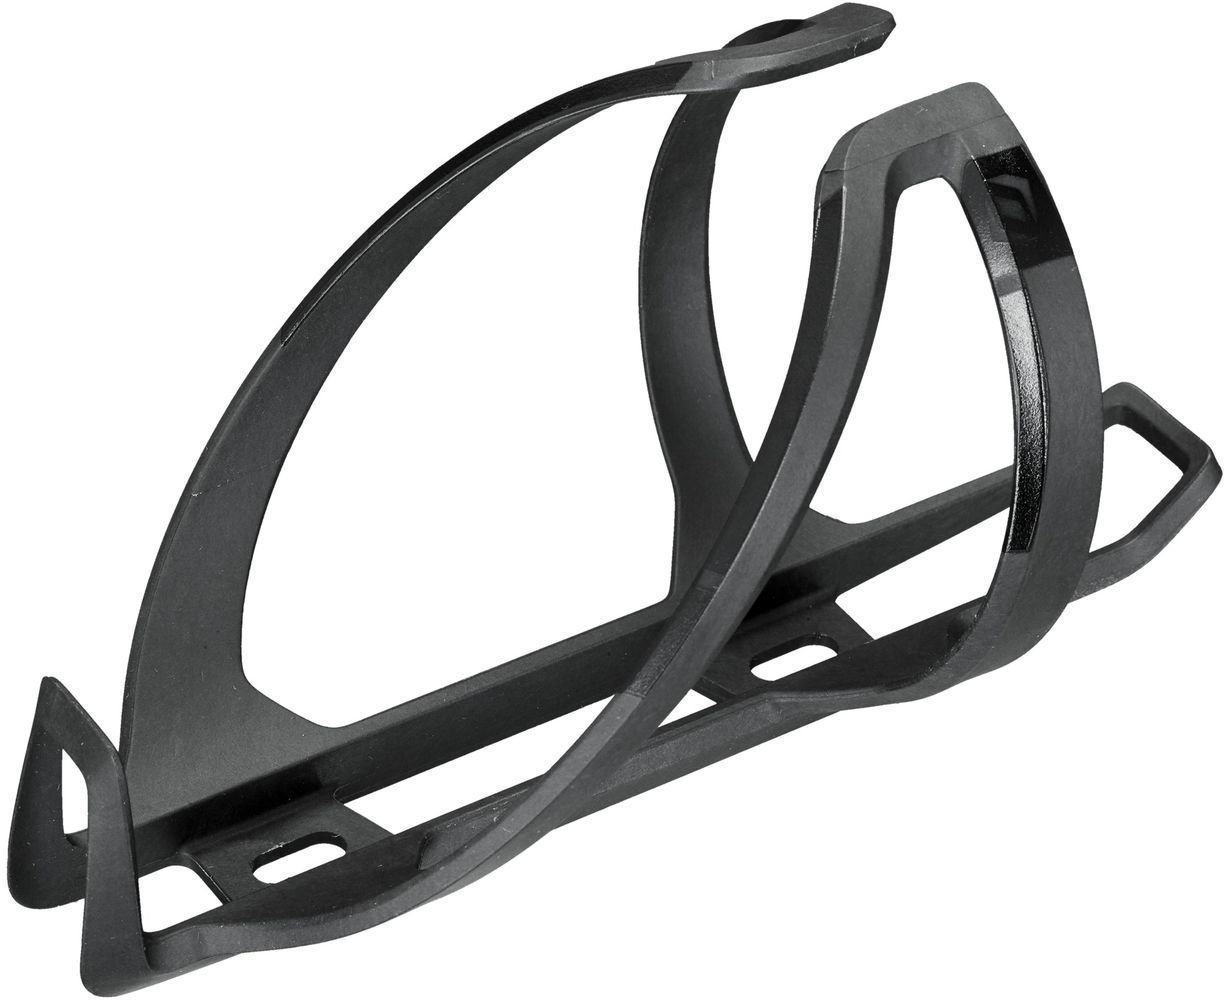 Flaskeholder til cykel Syncros Coupe Cage 1.0 Black Matt Flaskeholder til cykel